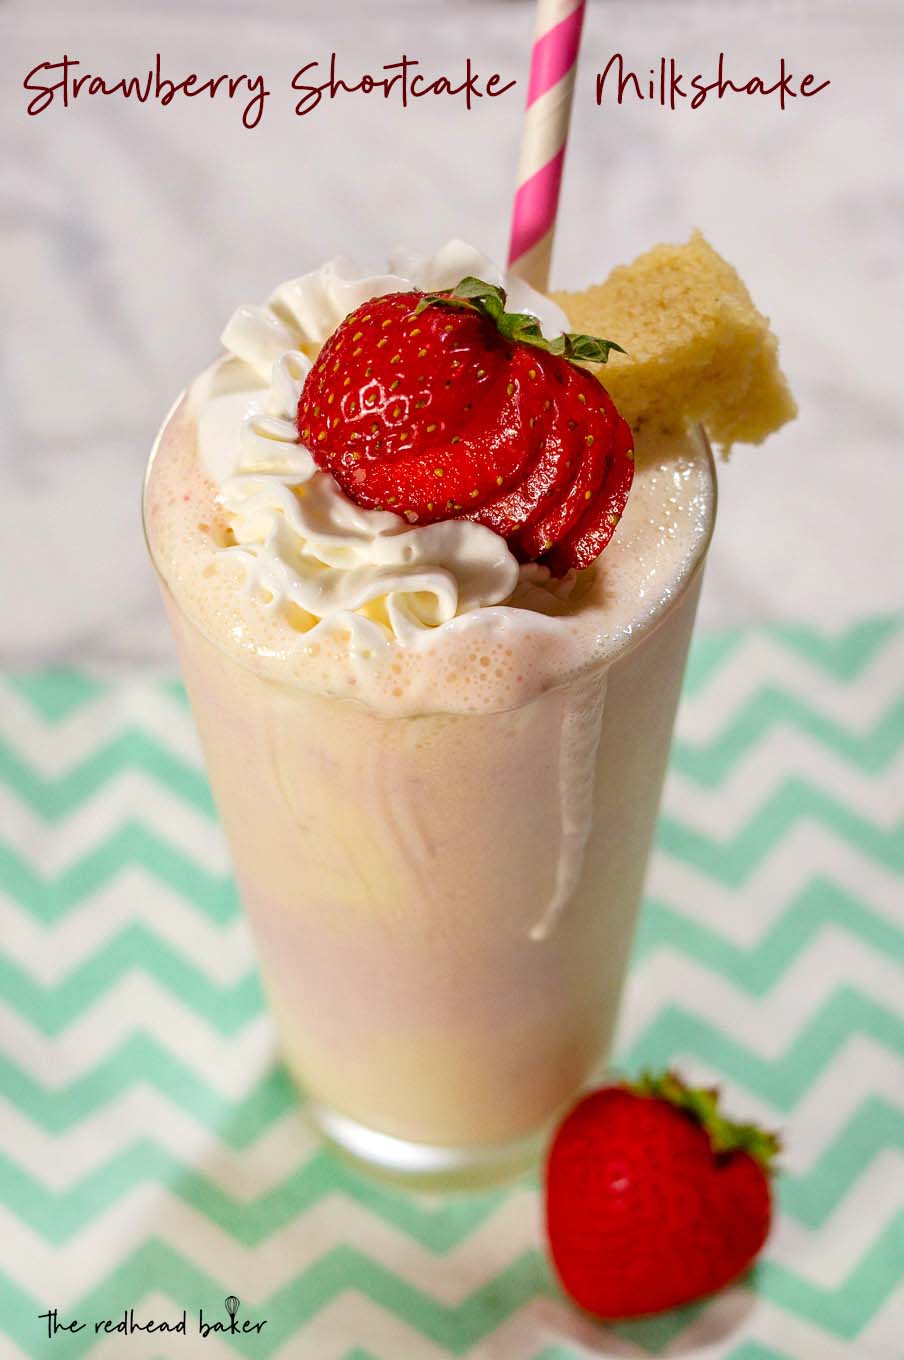 An overhead view of a strawberry shortcake milkshake garnished with whipped cream and a strawberry